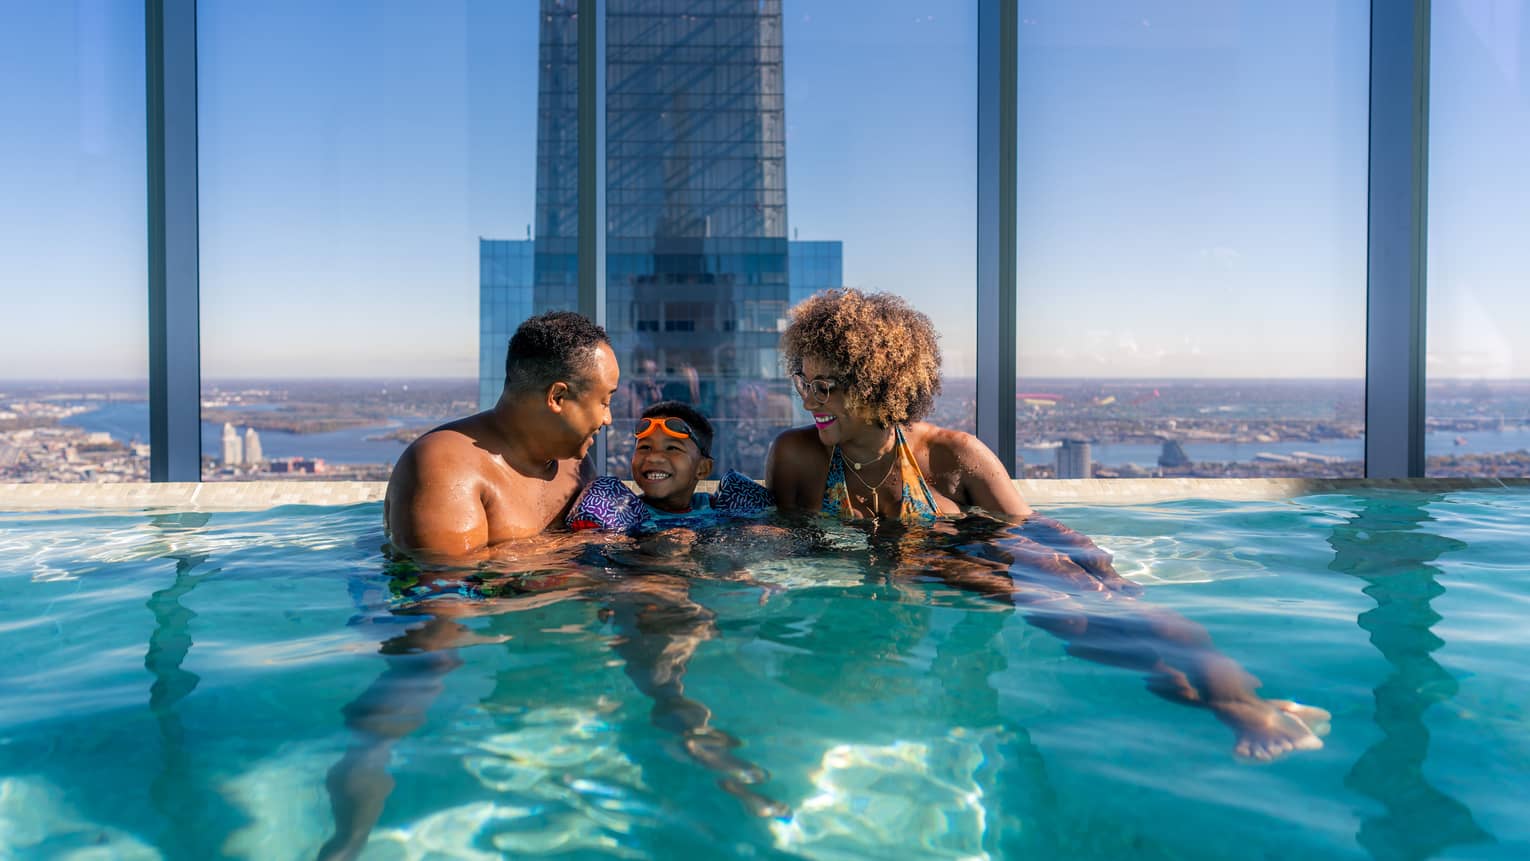 A father, mother and son in a pool surrounded by large windows looking out at a city skyline.